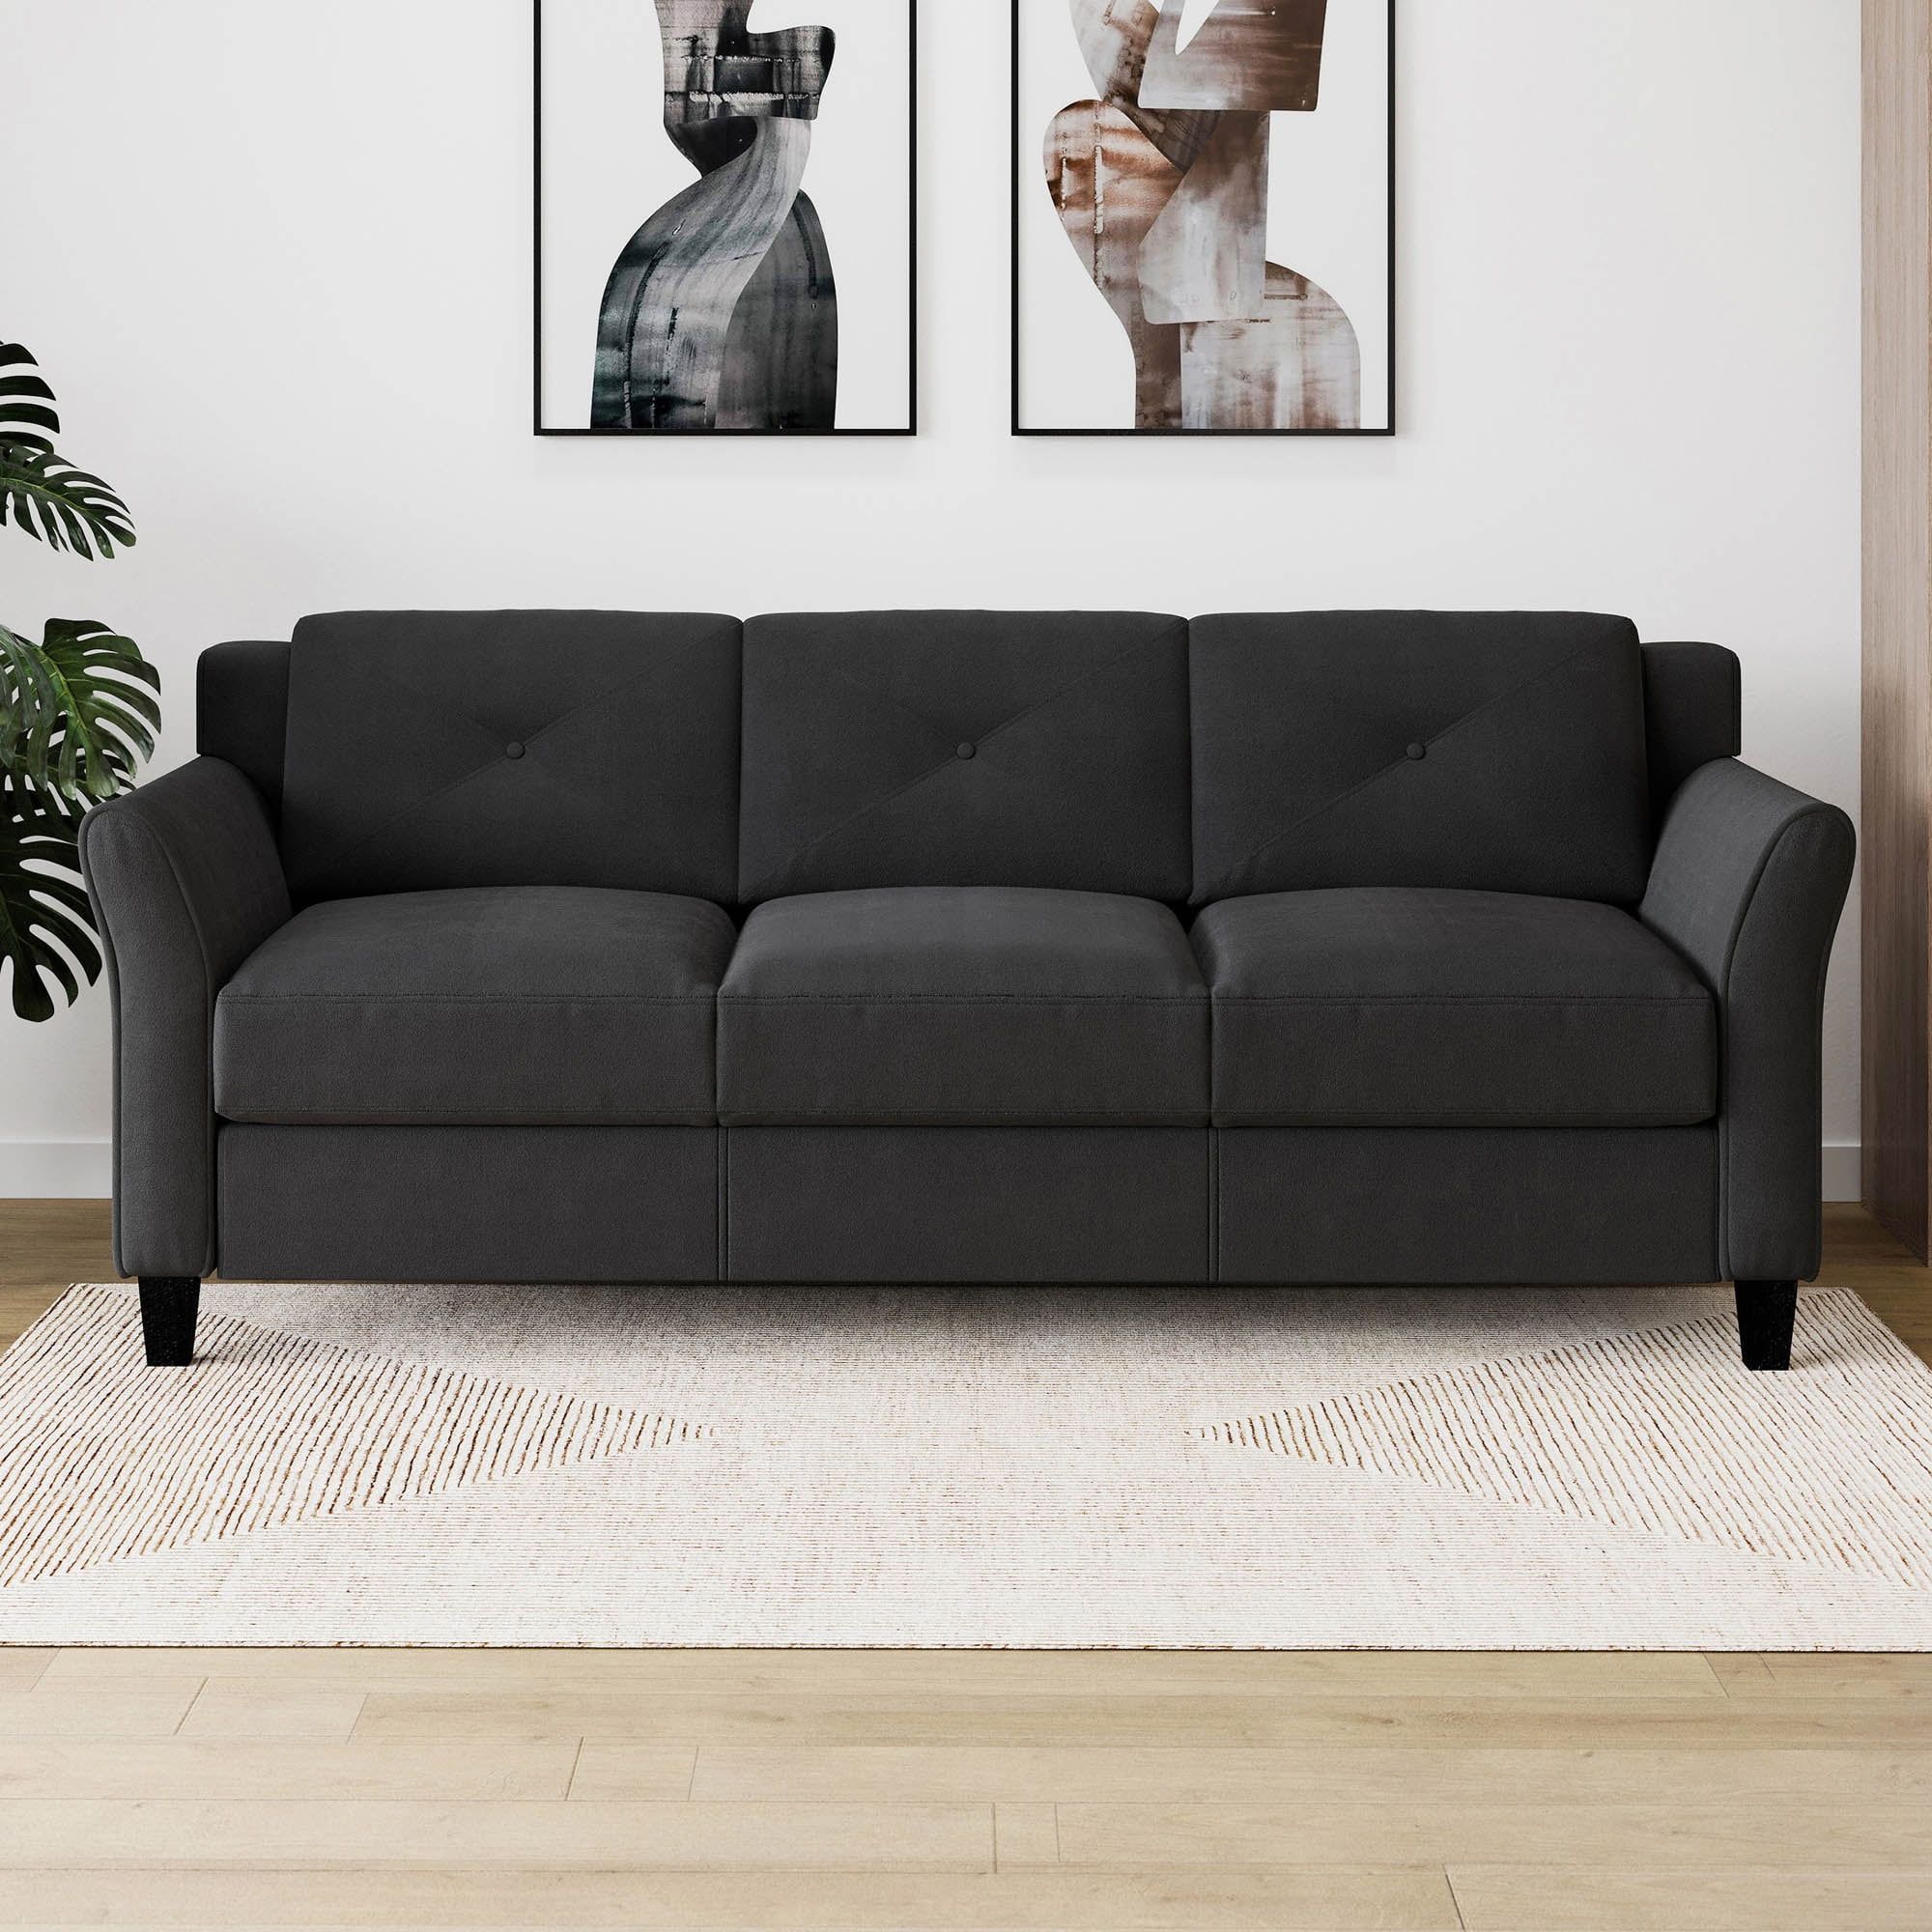 Lifestyle Solutions Taryn Traditional Sofa With Curved Arms, Black Fabric  Upholstery – Walmart Throughout Sofas With Curved Arms (View 8 of 15)